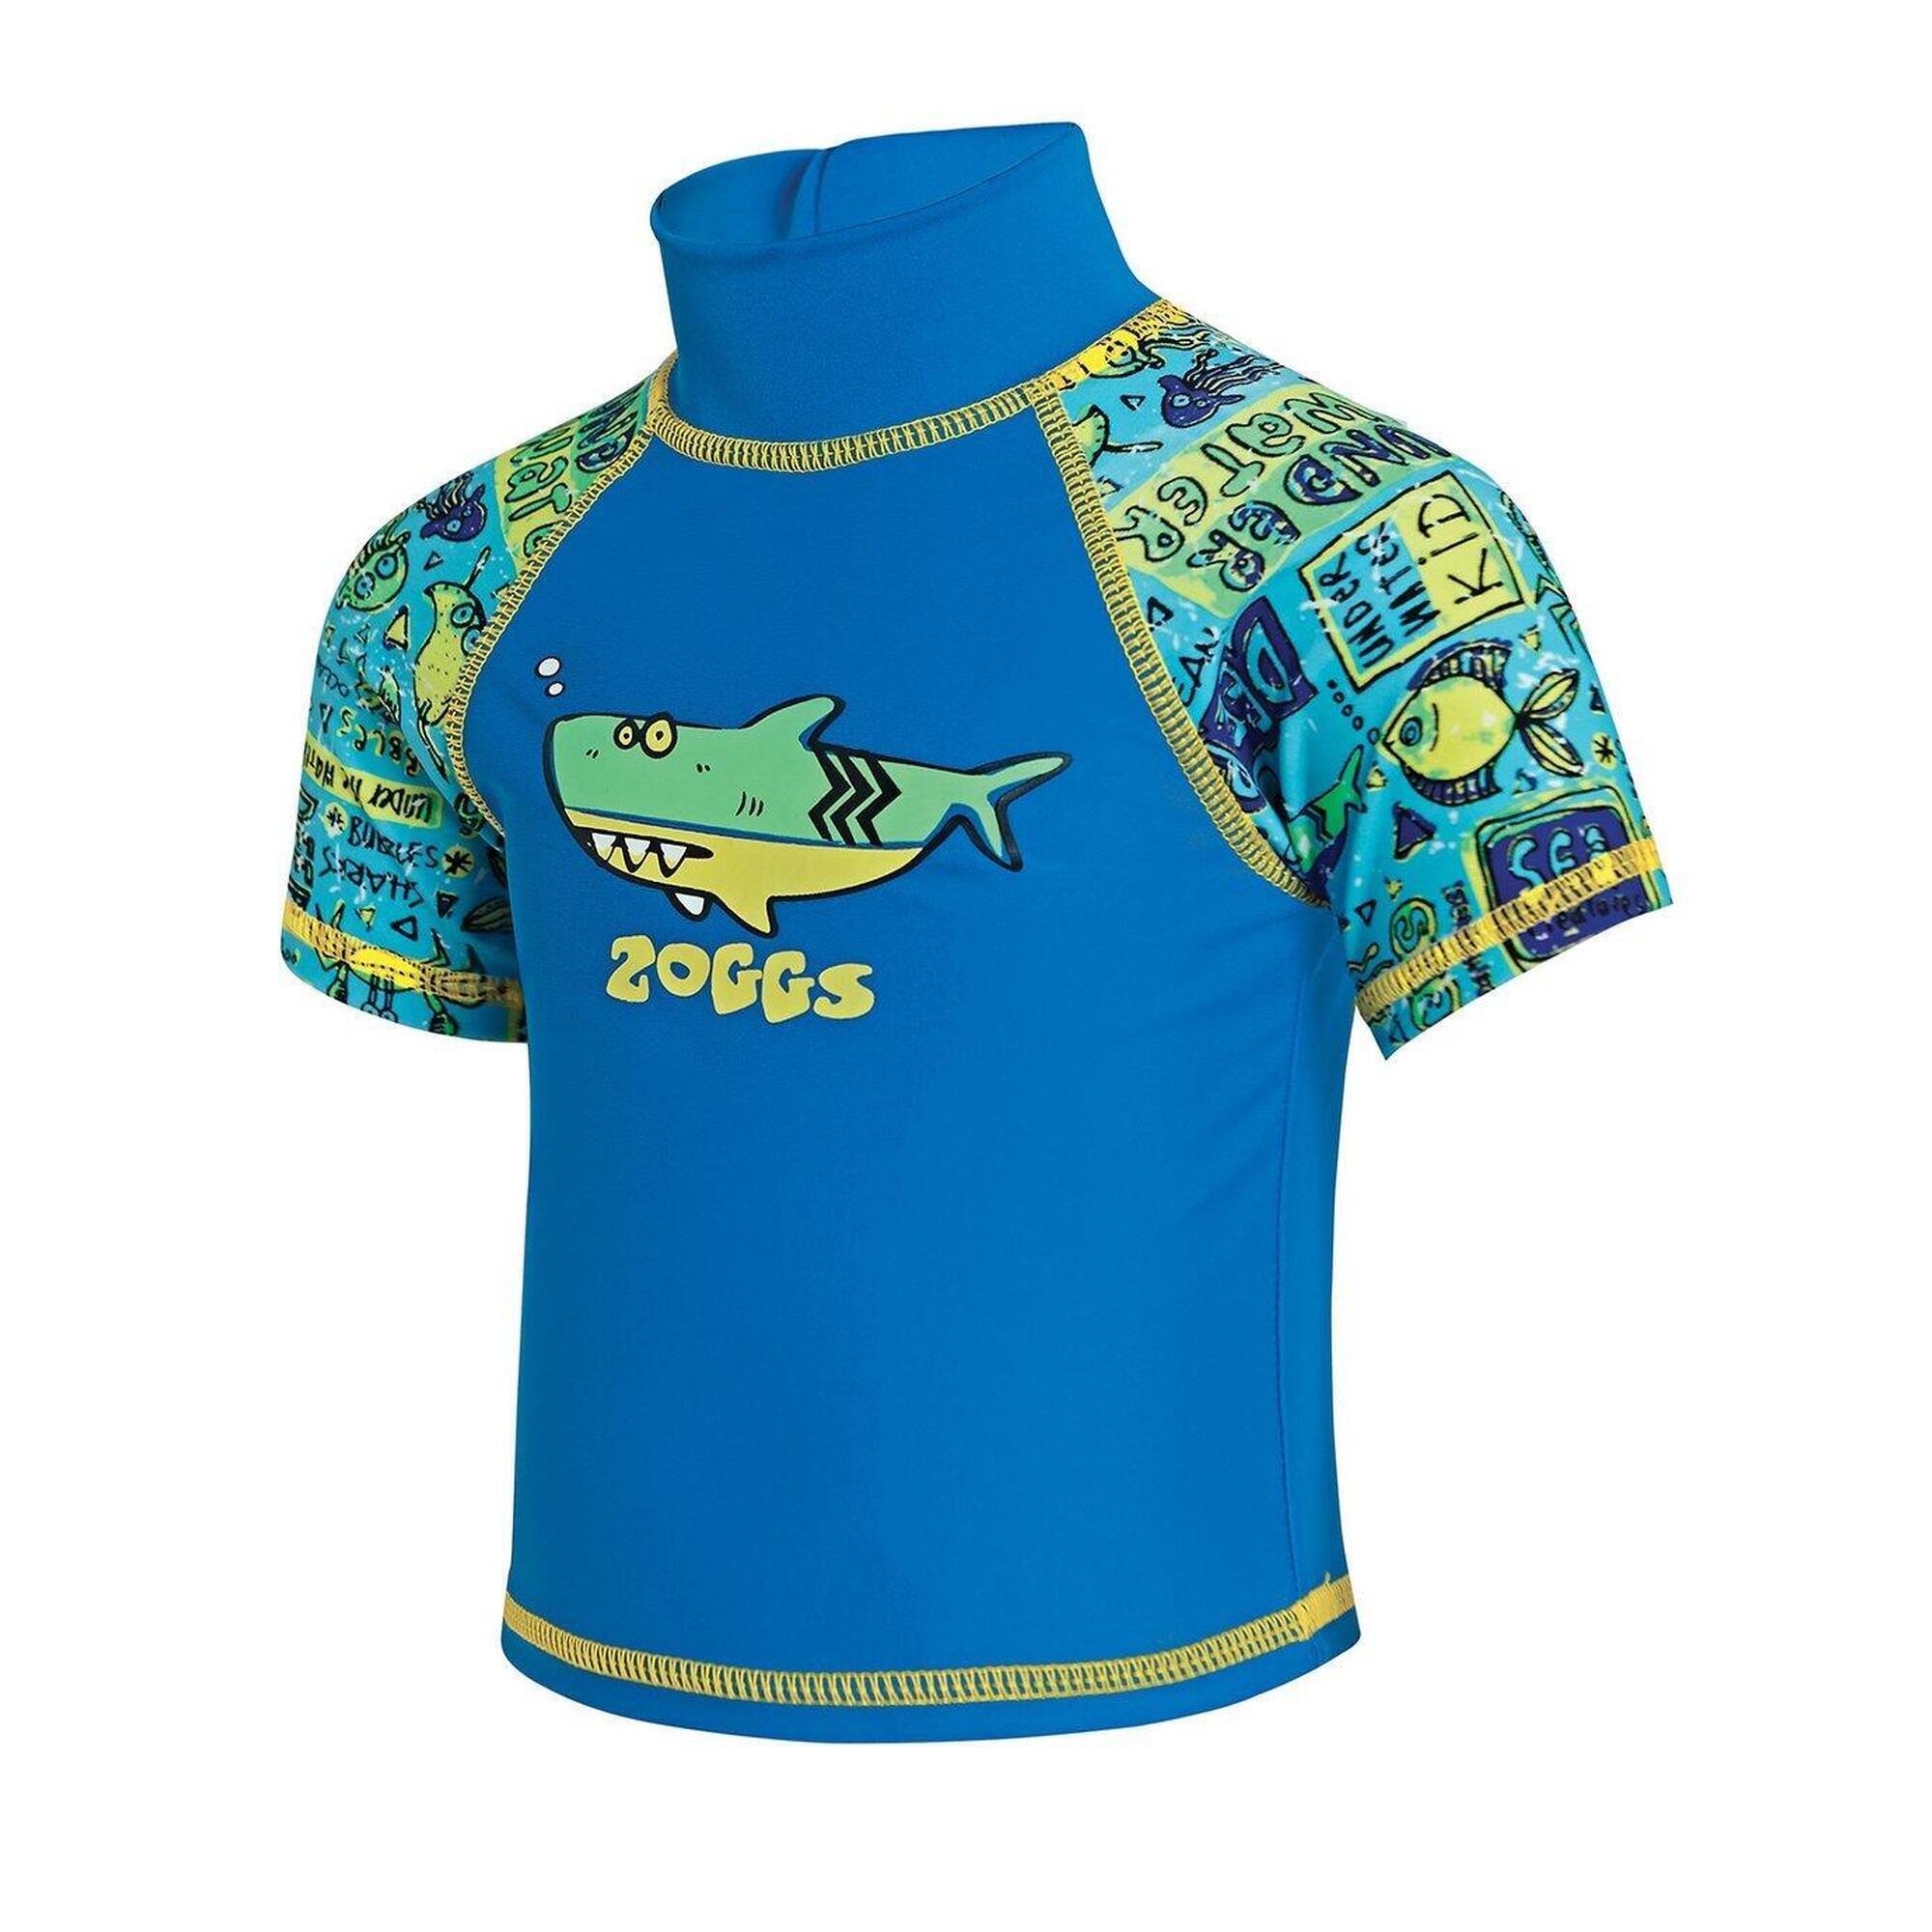 ZOGGS Zoggs Tots Boys Sun Protection Top - Blue